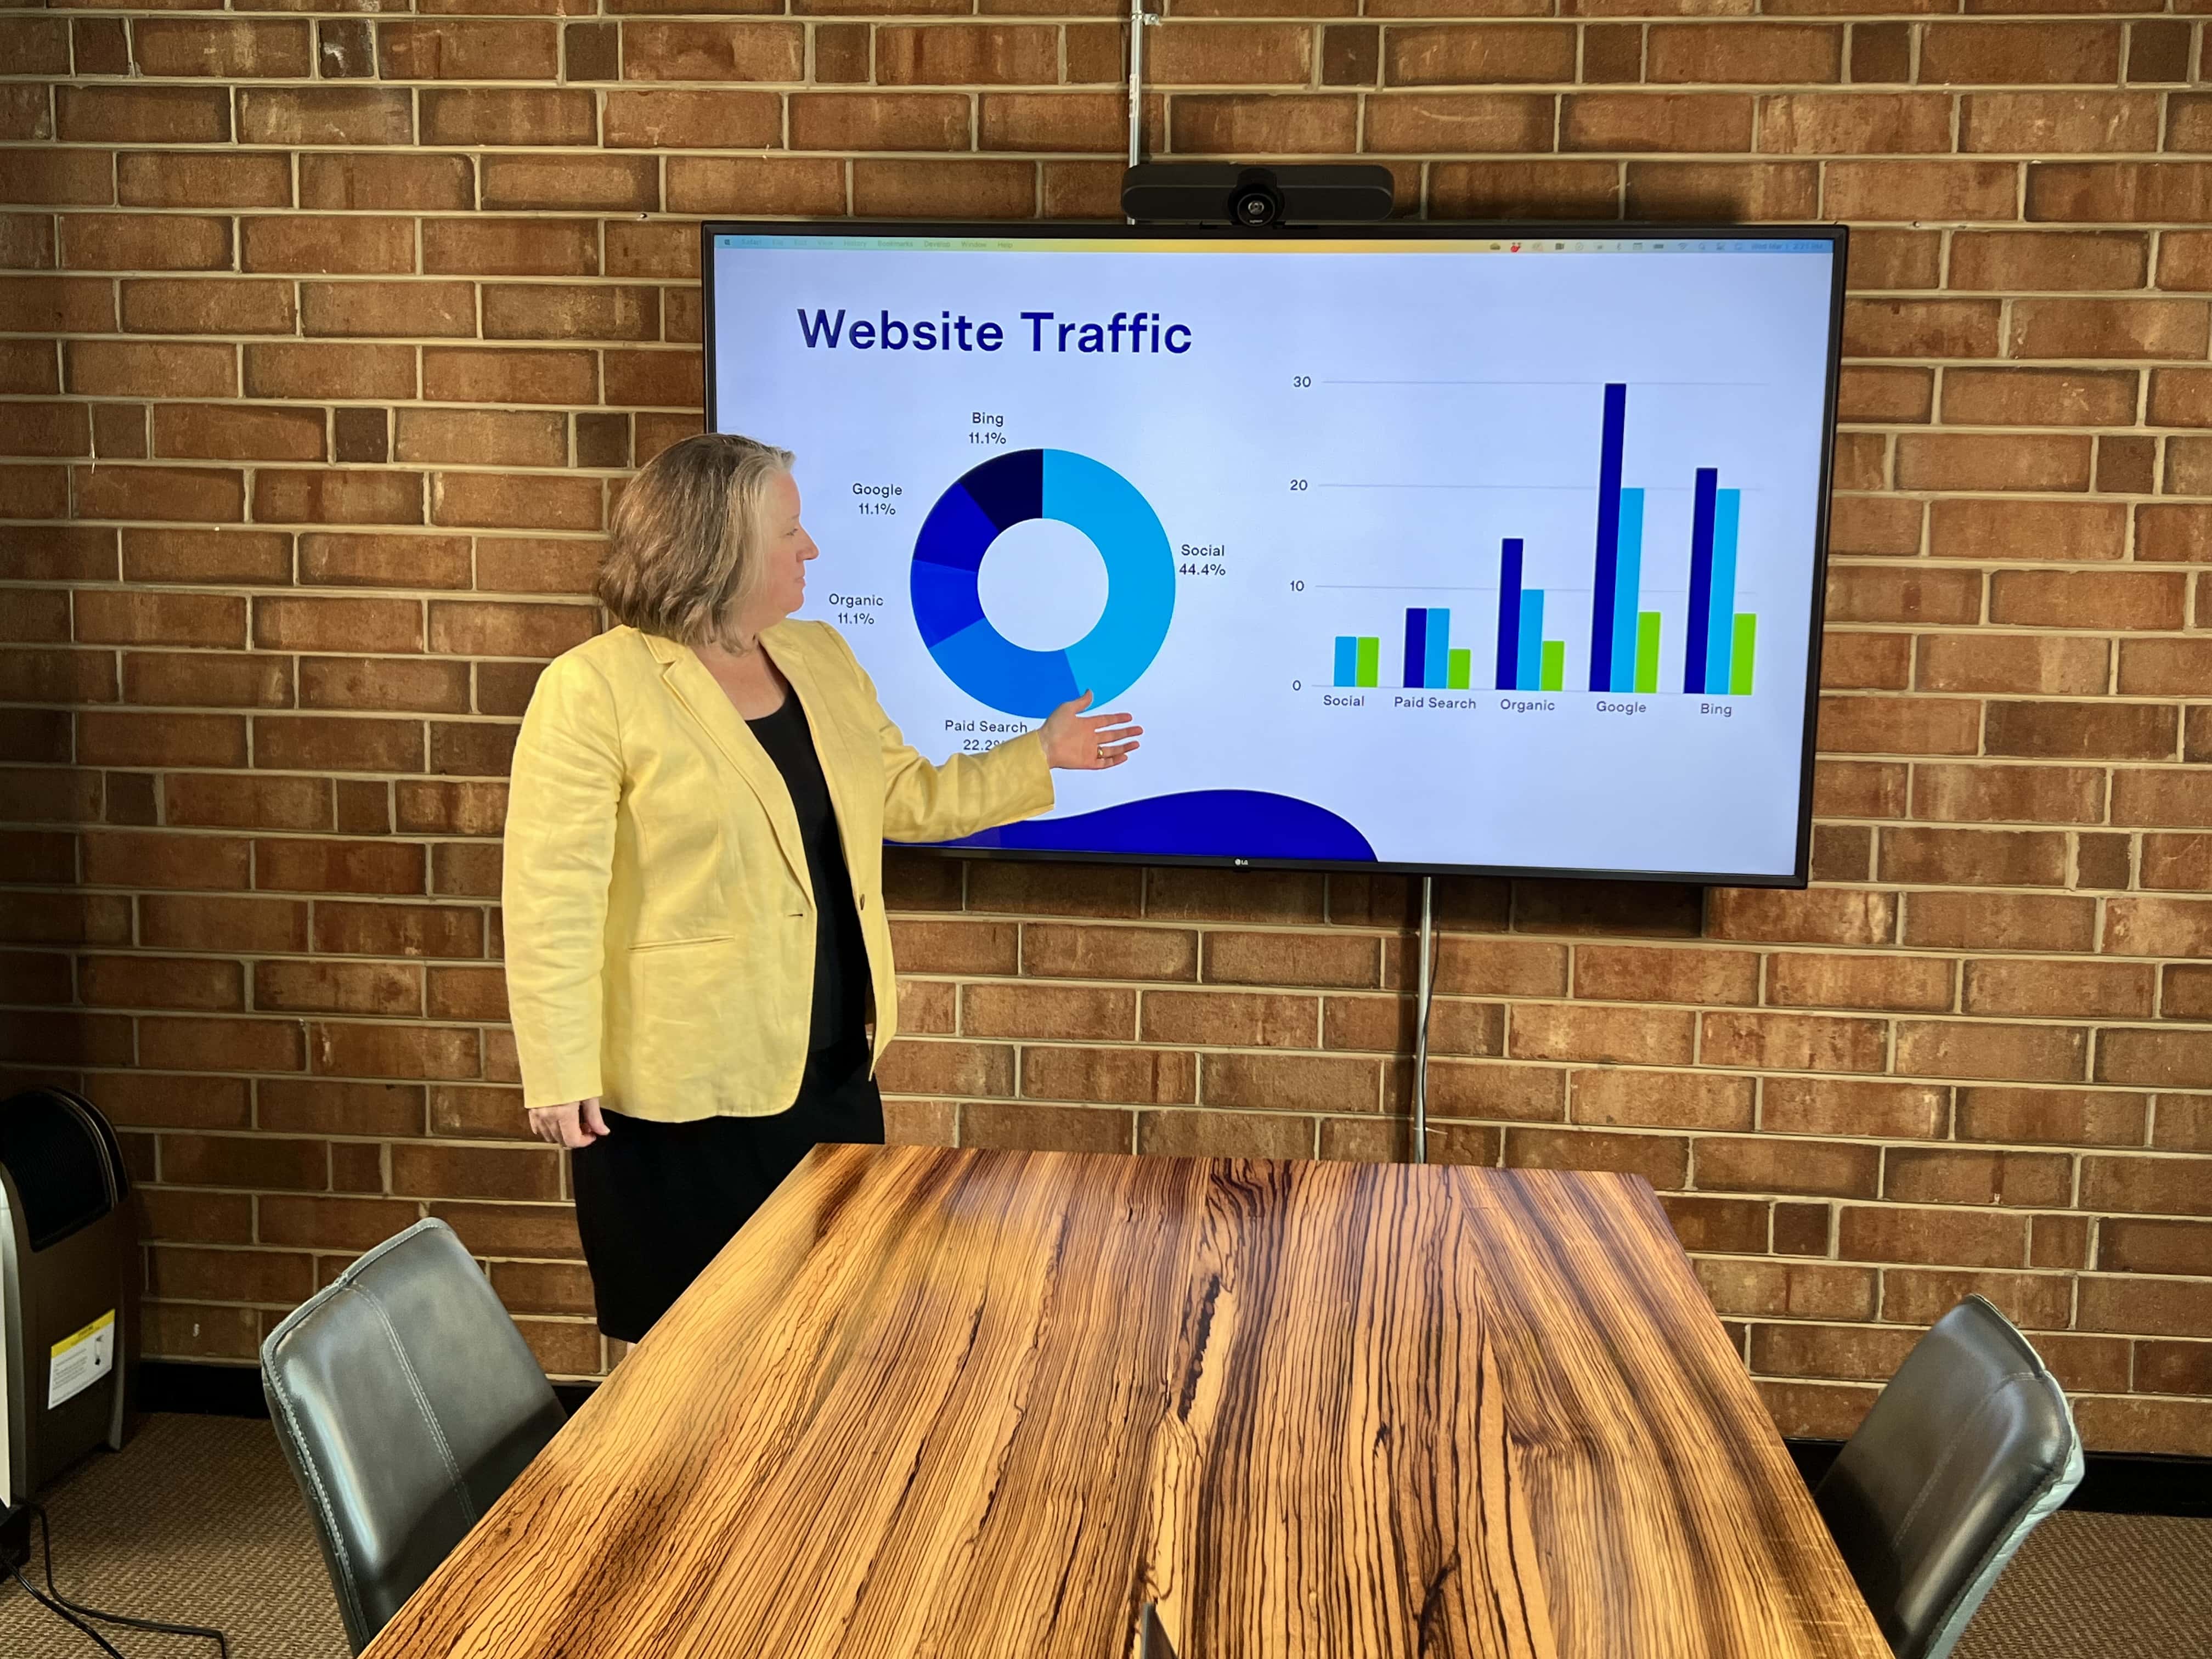 Kelly at New Path shows off results after website development project